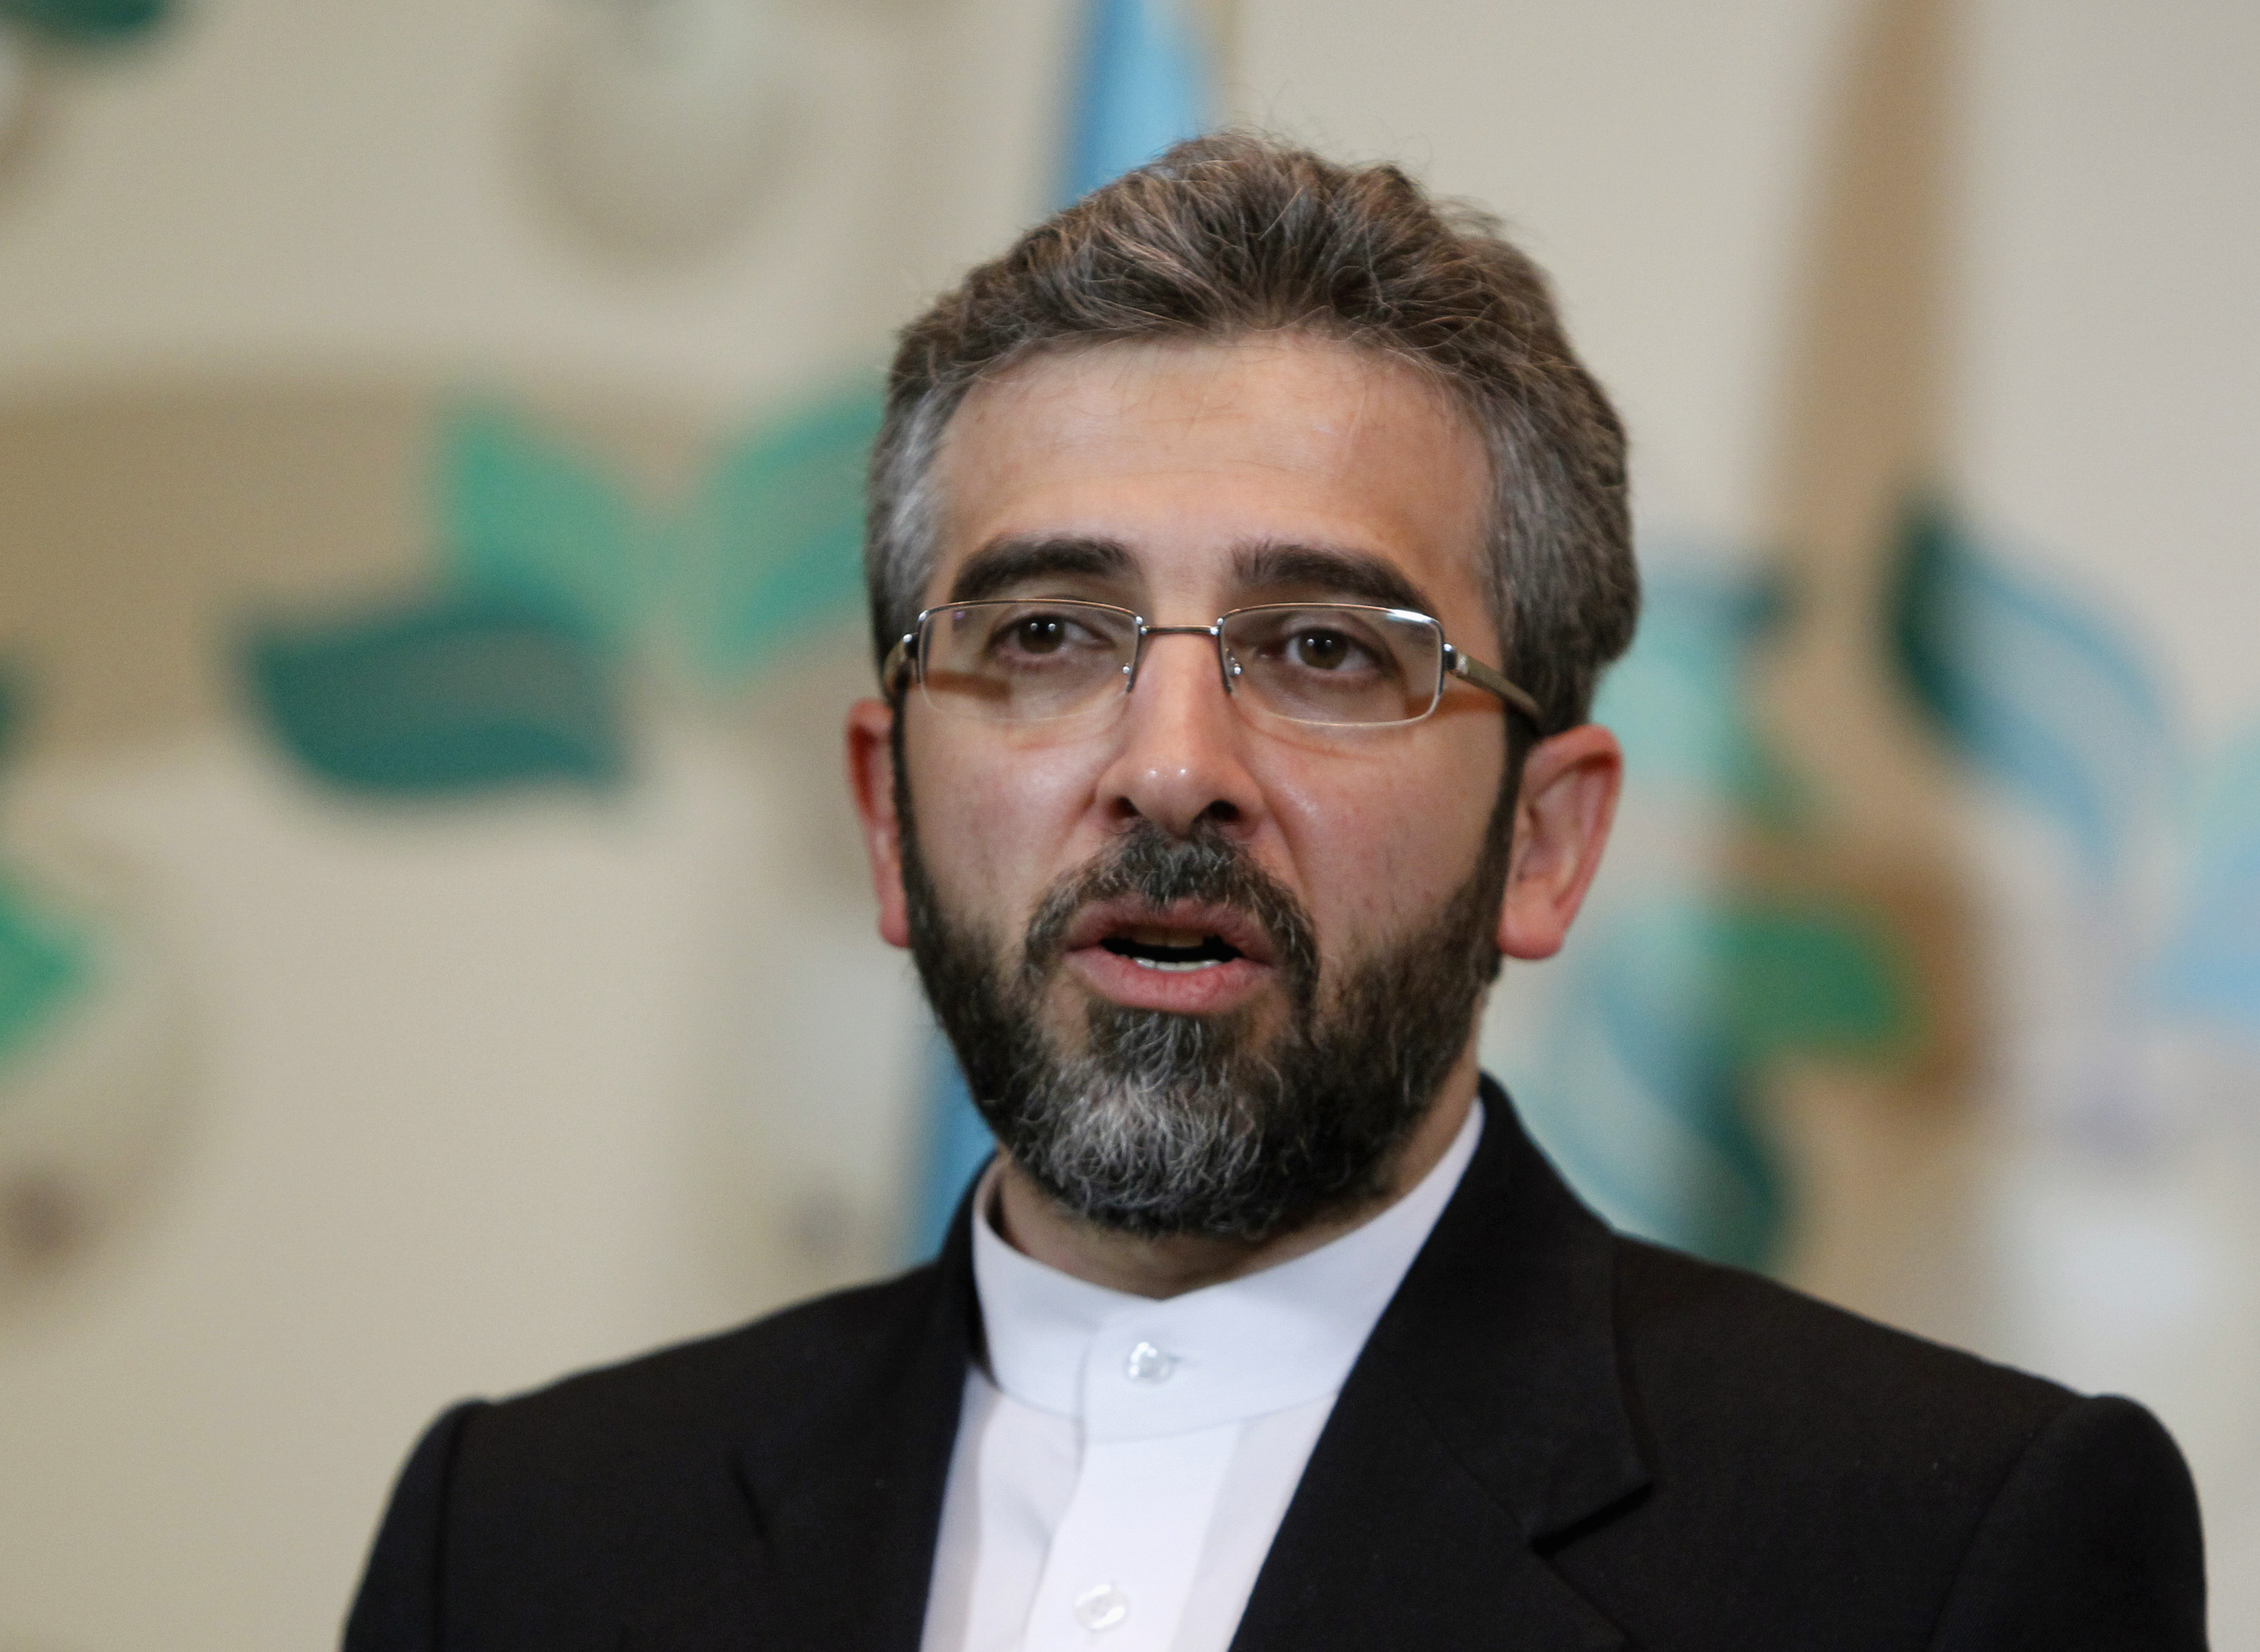 Iran's deputy negotiator Bagheri speaks during a news conference in Almaty